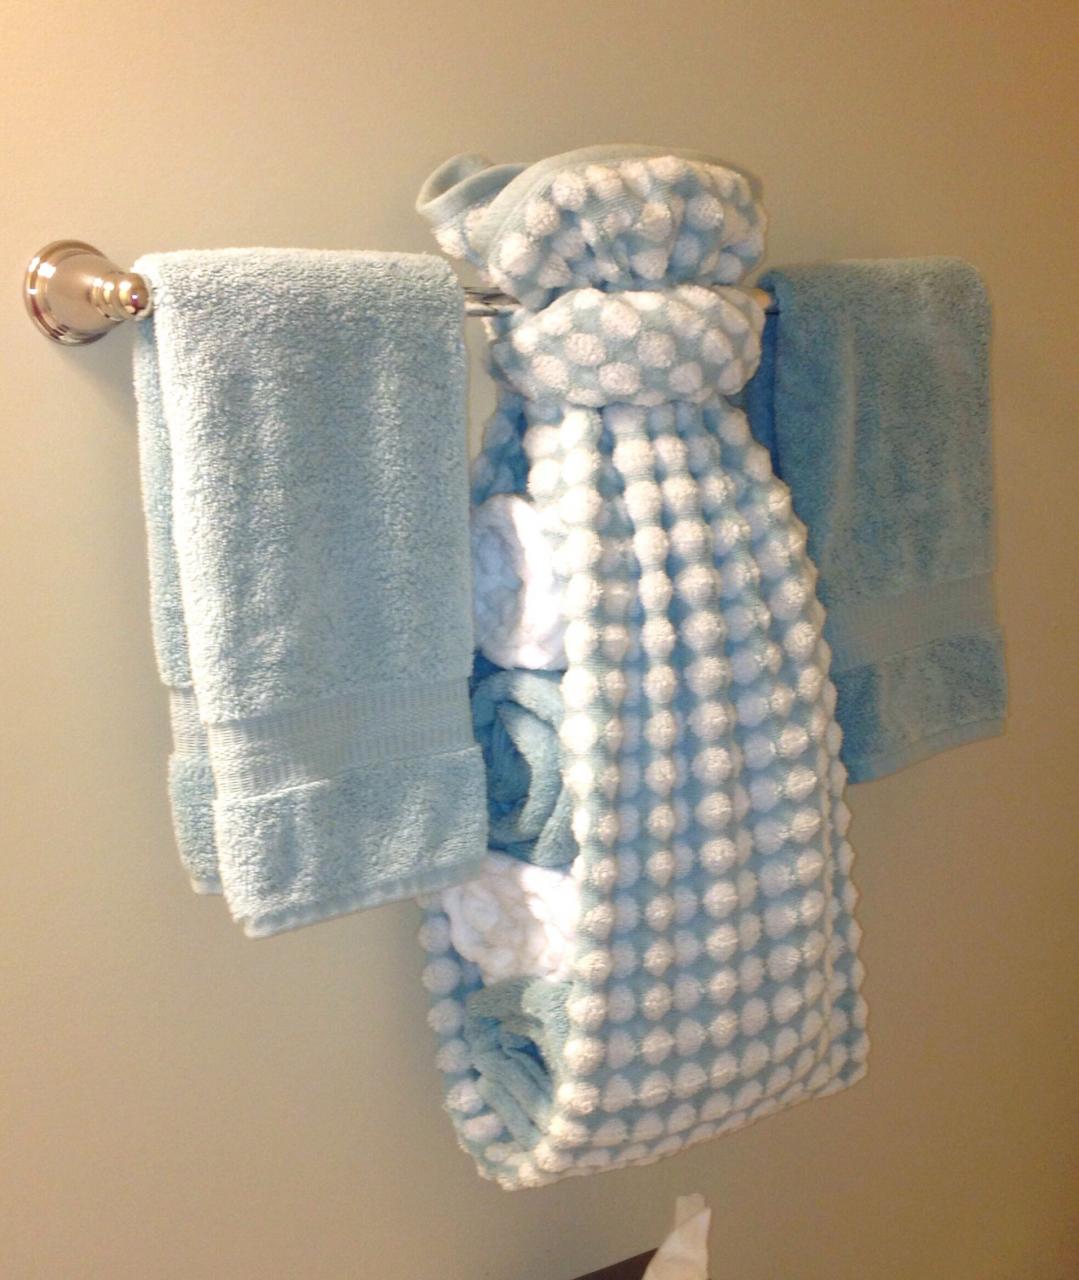 Incredible Bathroom Towel Decorating Ideas For Small Space Home